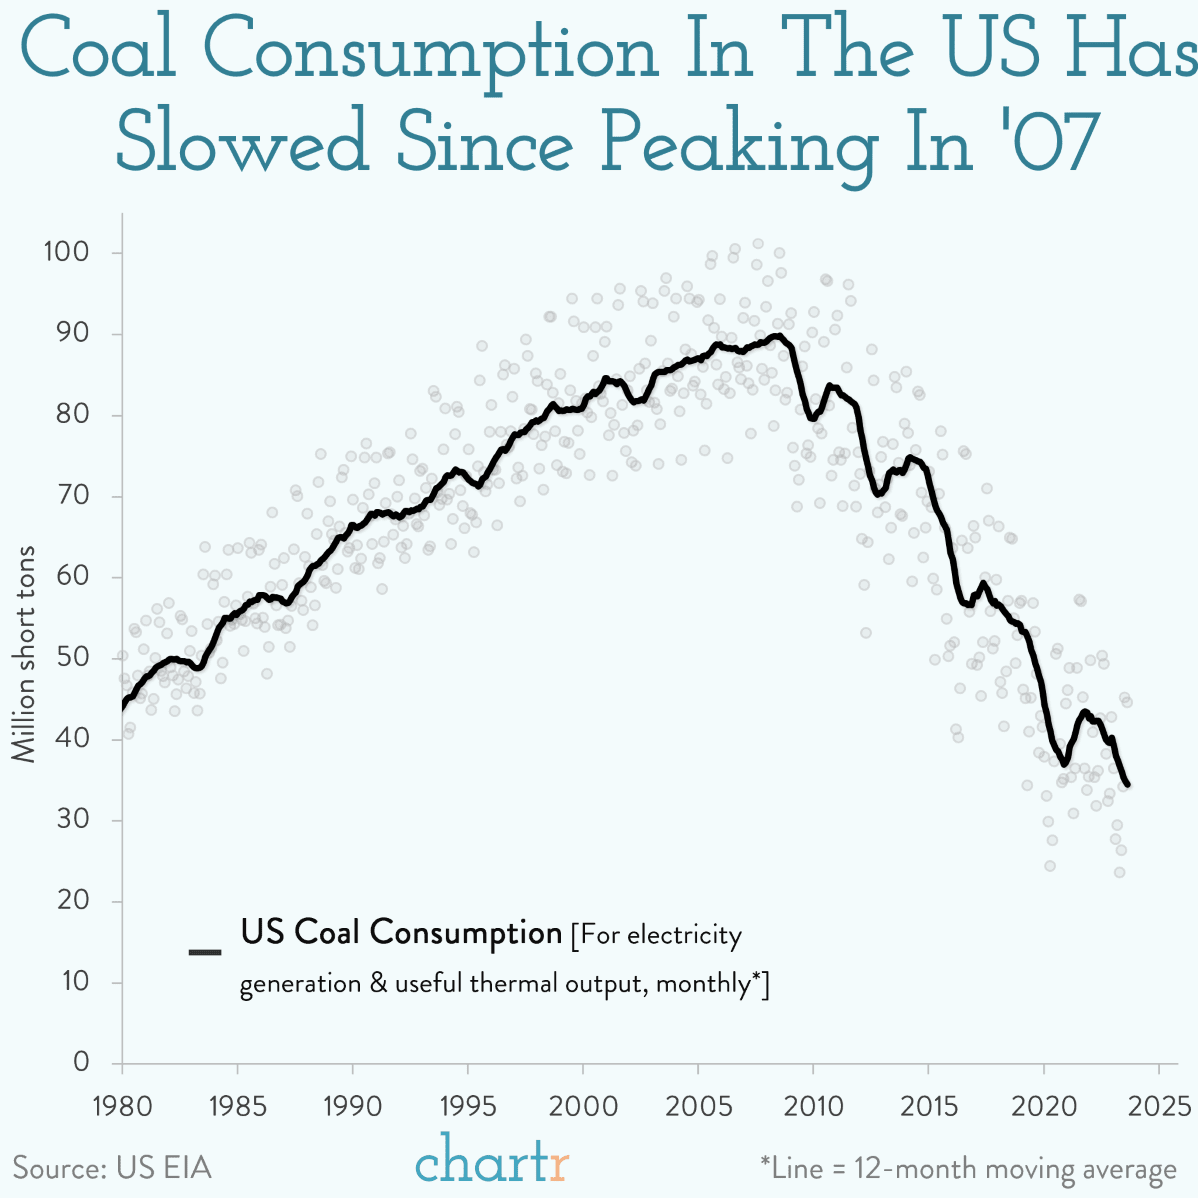 We continue to see a reduction in US coal consumption. Let's keep building more renewable energy sources to reduce it even further!